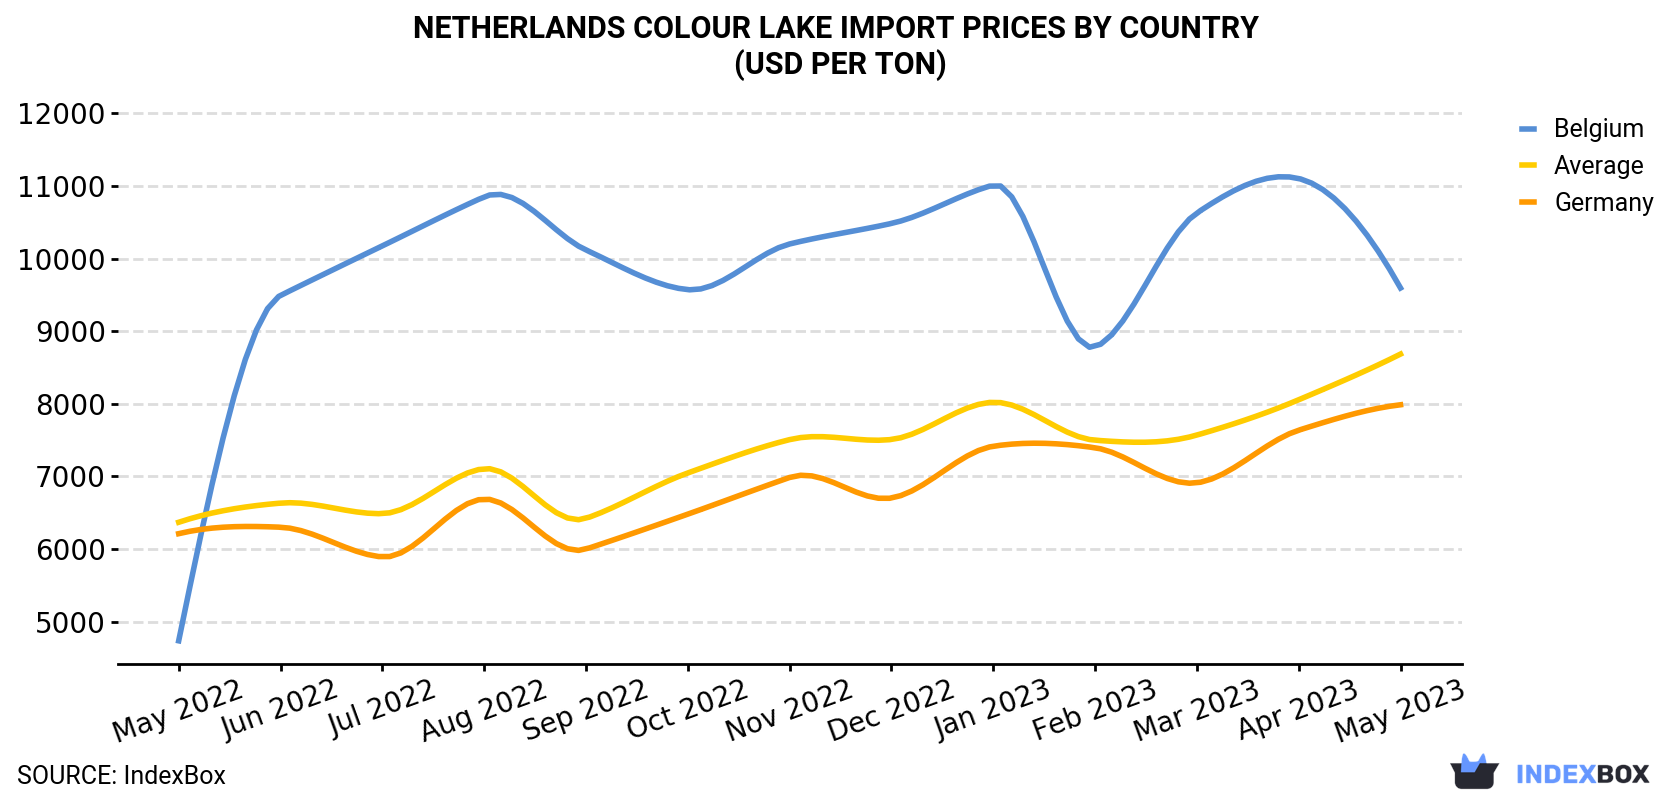 Netherlands Colour Lake Import Prices By Country (USD Per Ton)